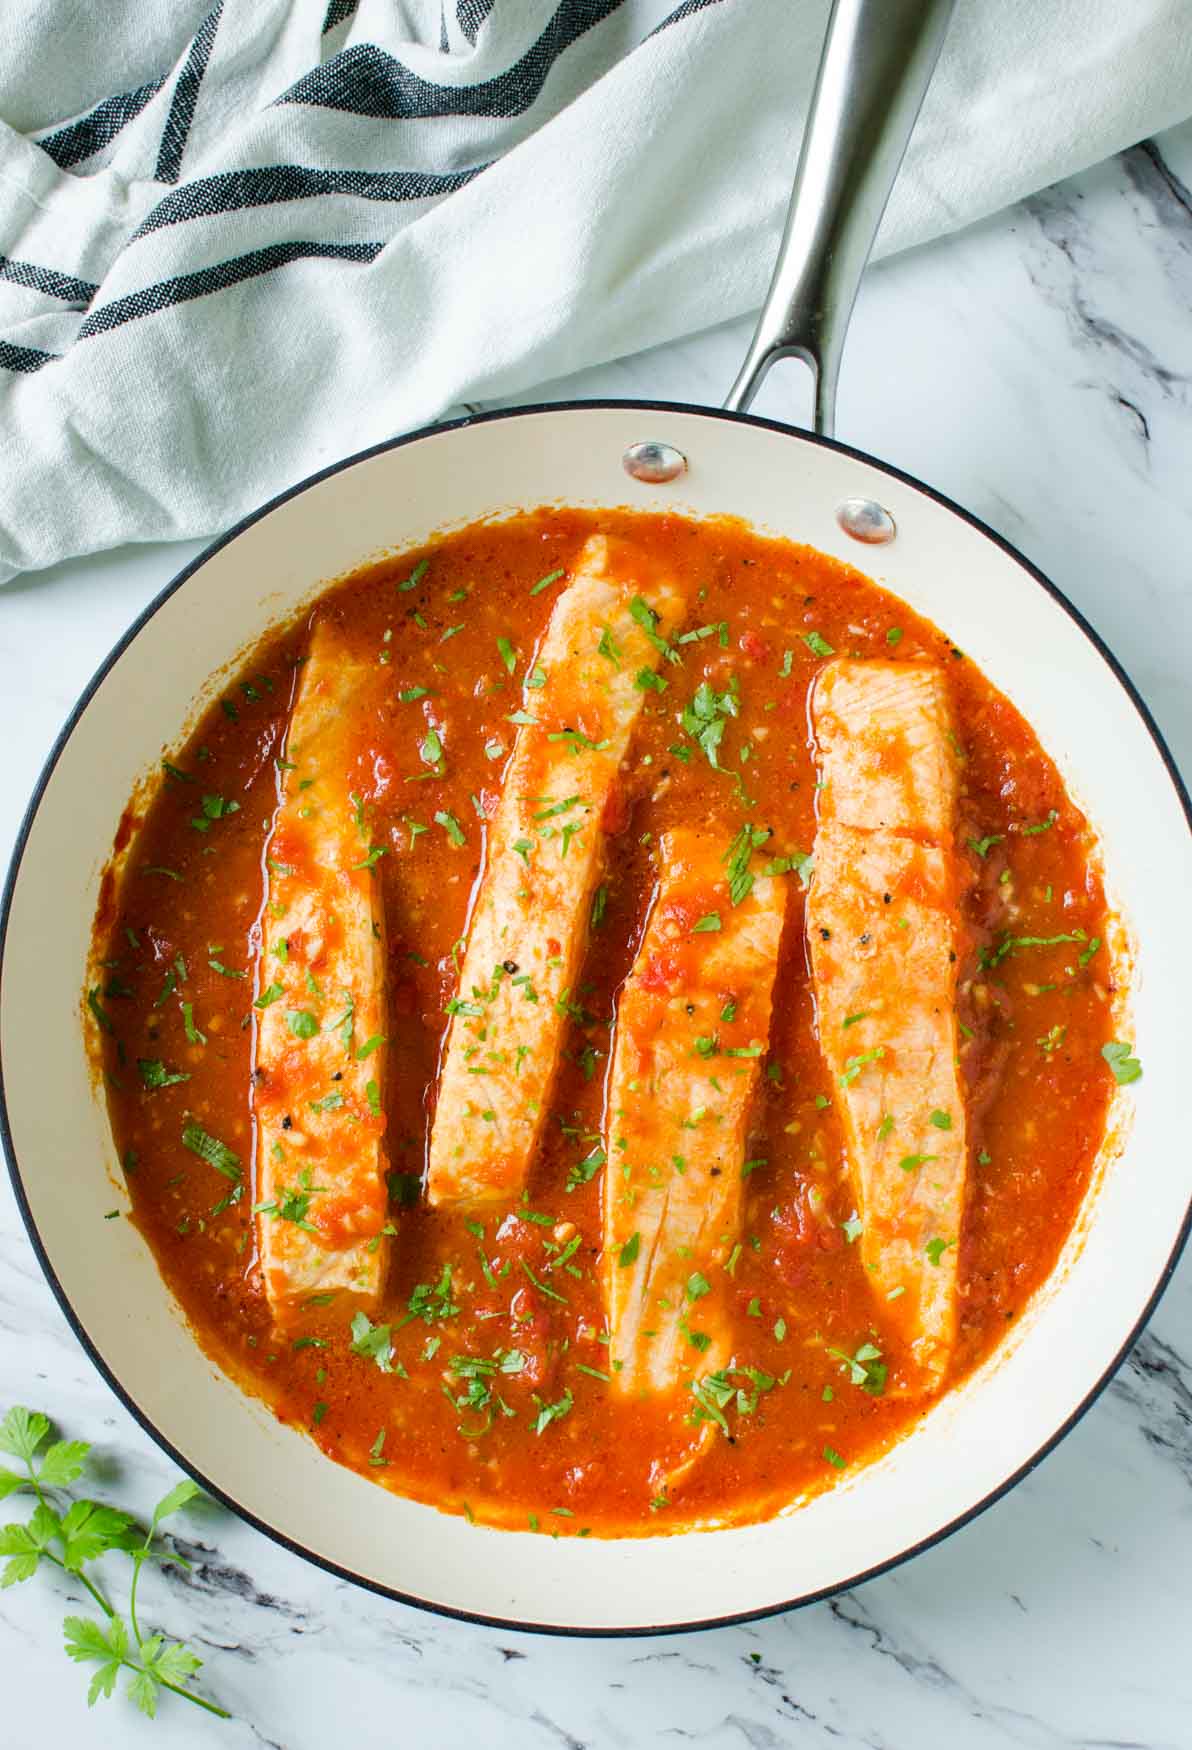 Salmon in Tomato Sauce - cook salmon in fresh garlic and tomato sauce. Serve on the side of pasta, grits or rice for complete healthy dinner or lunch. Quick and easy weeknight meal.